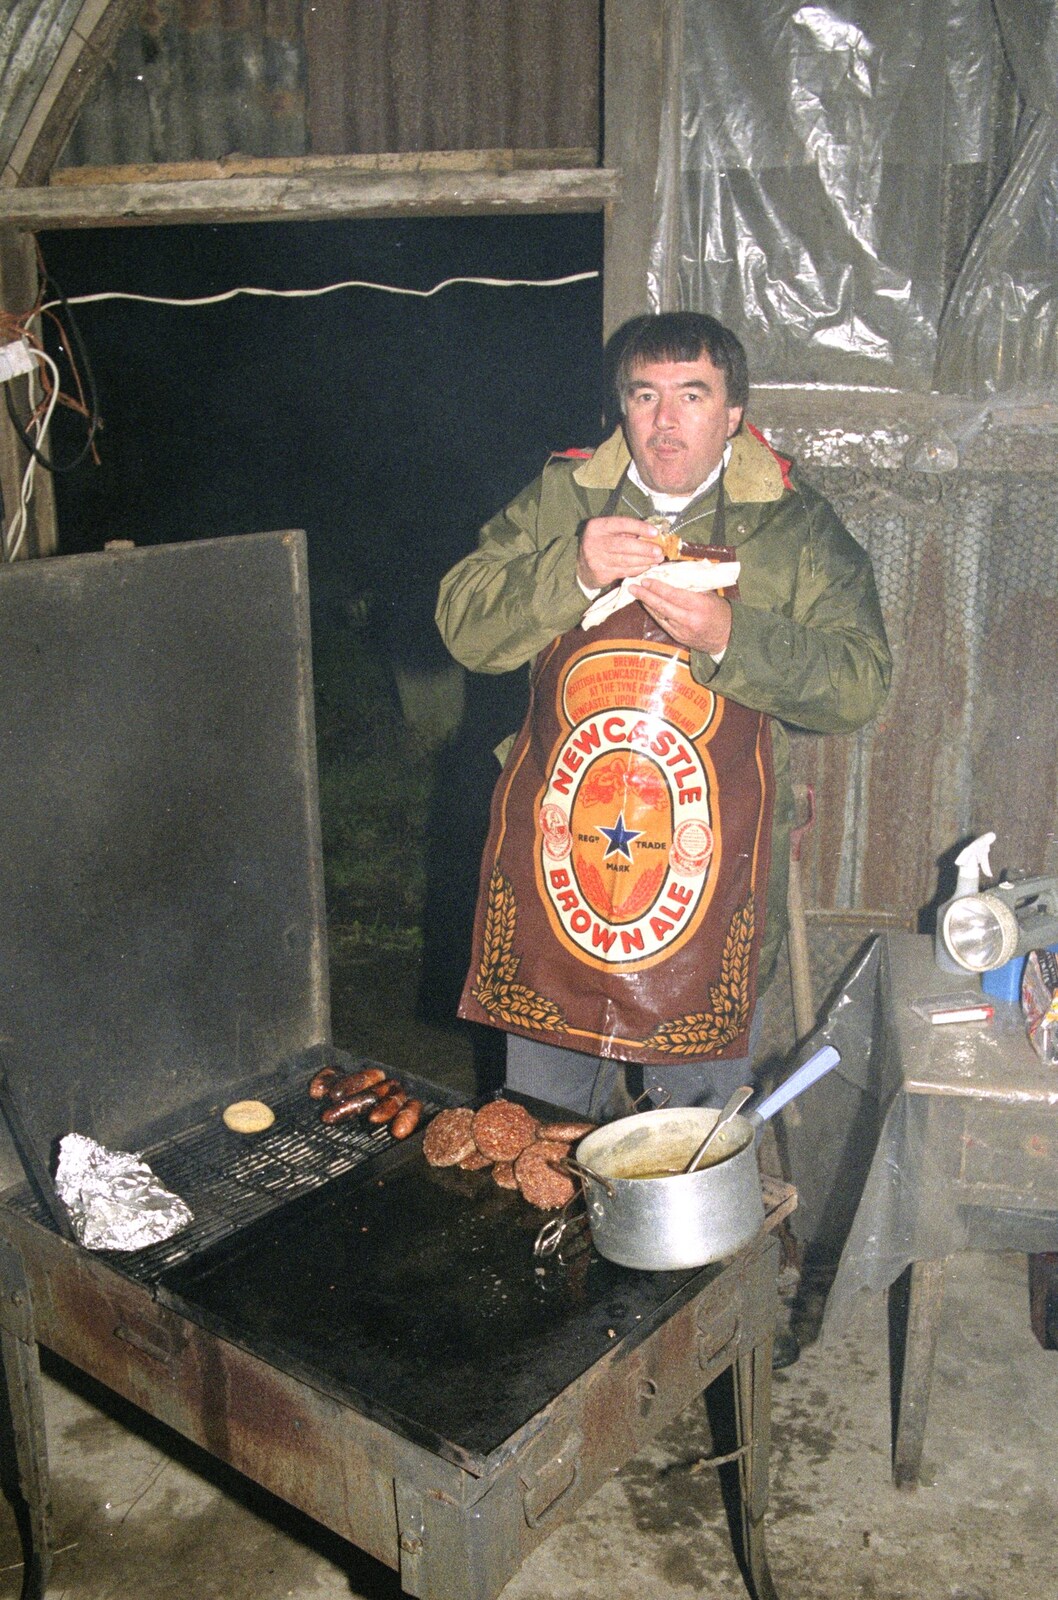 Corky tests his cooking from Bonfire Night, Stuston, Suffolk - 5th November 1990